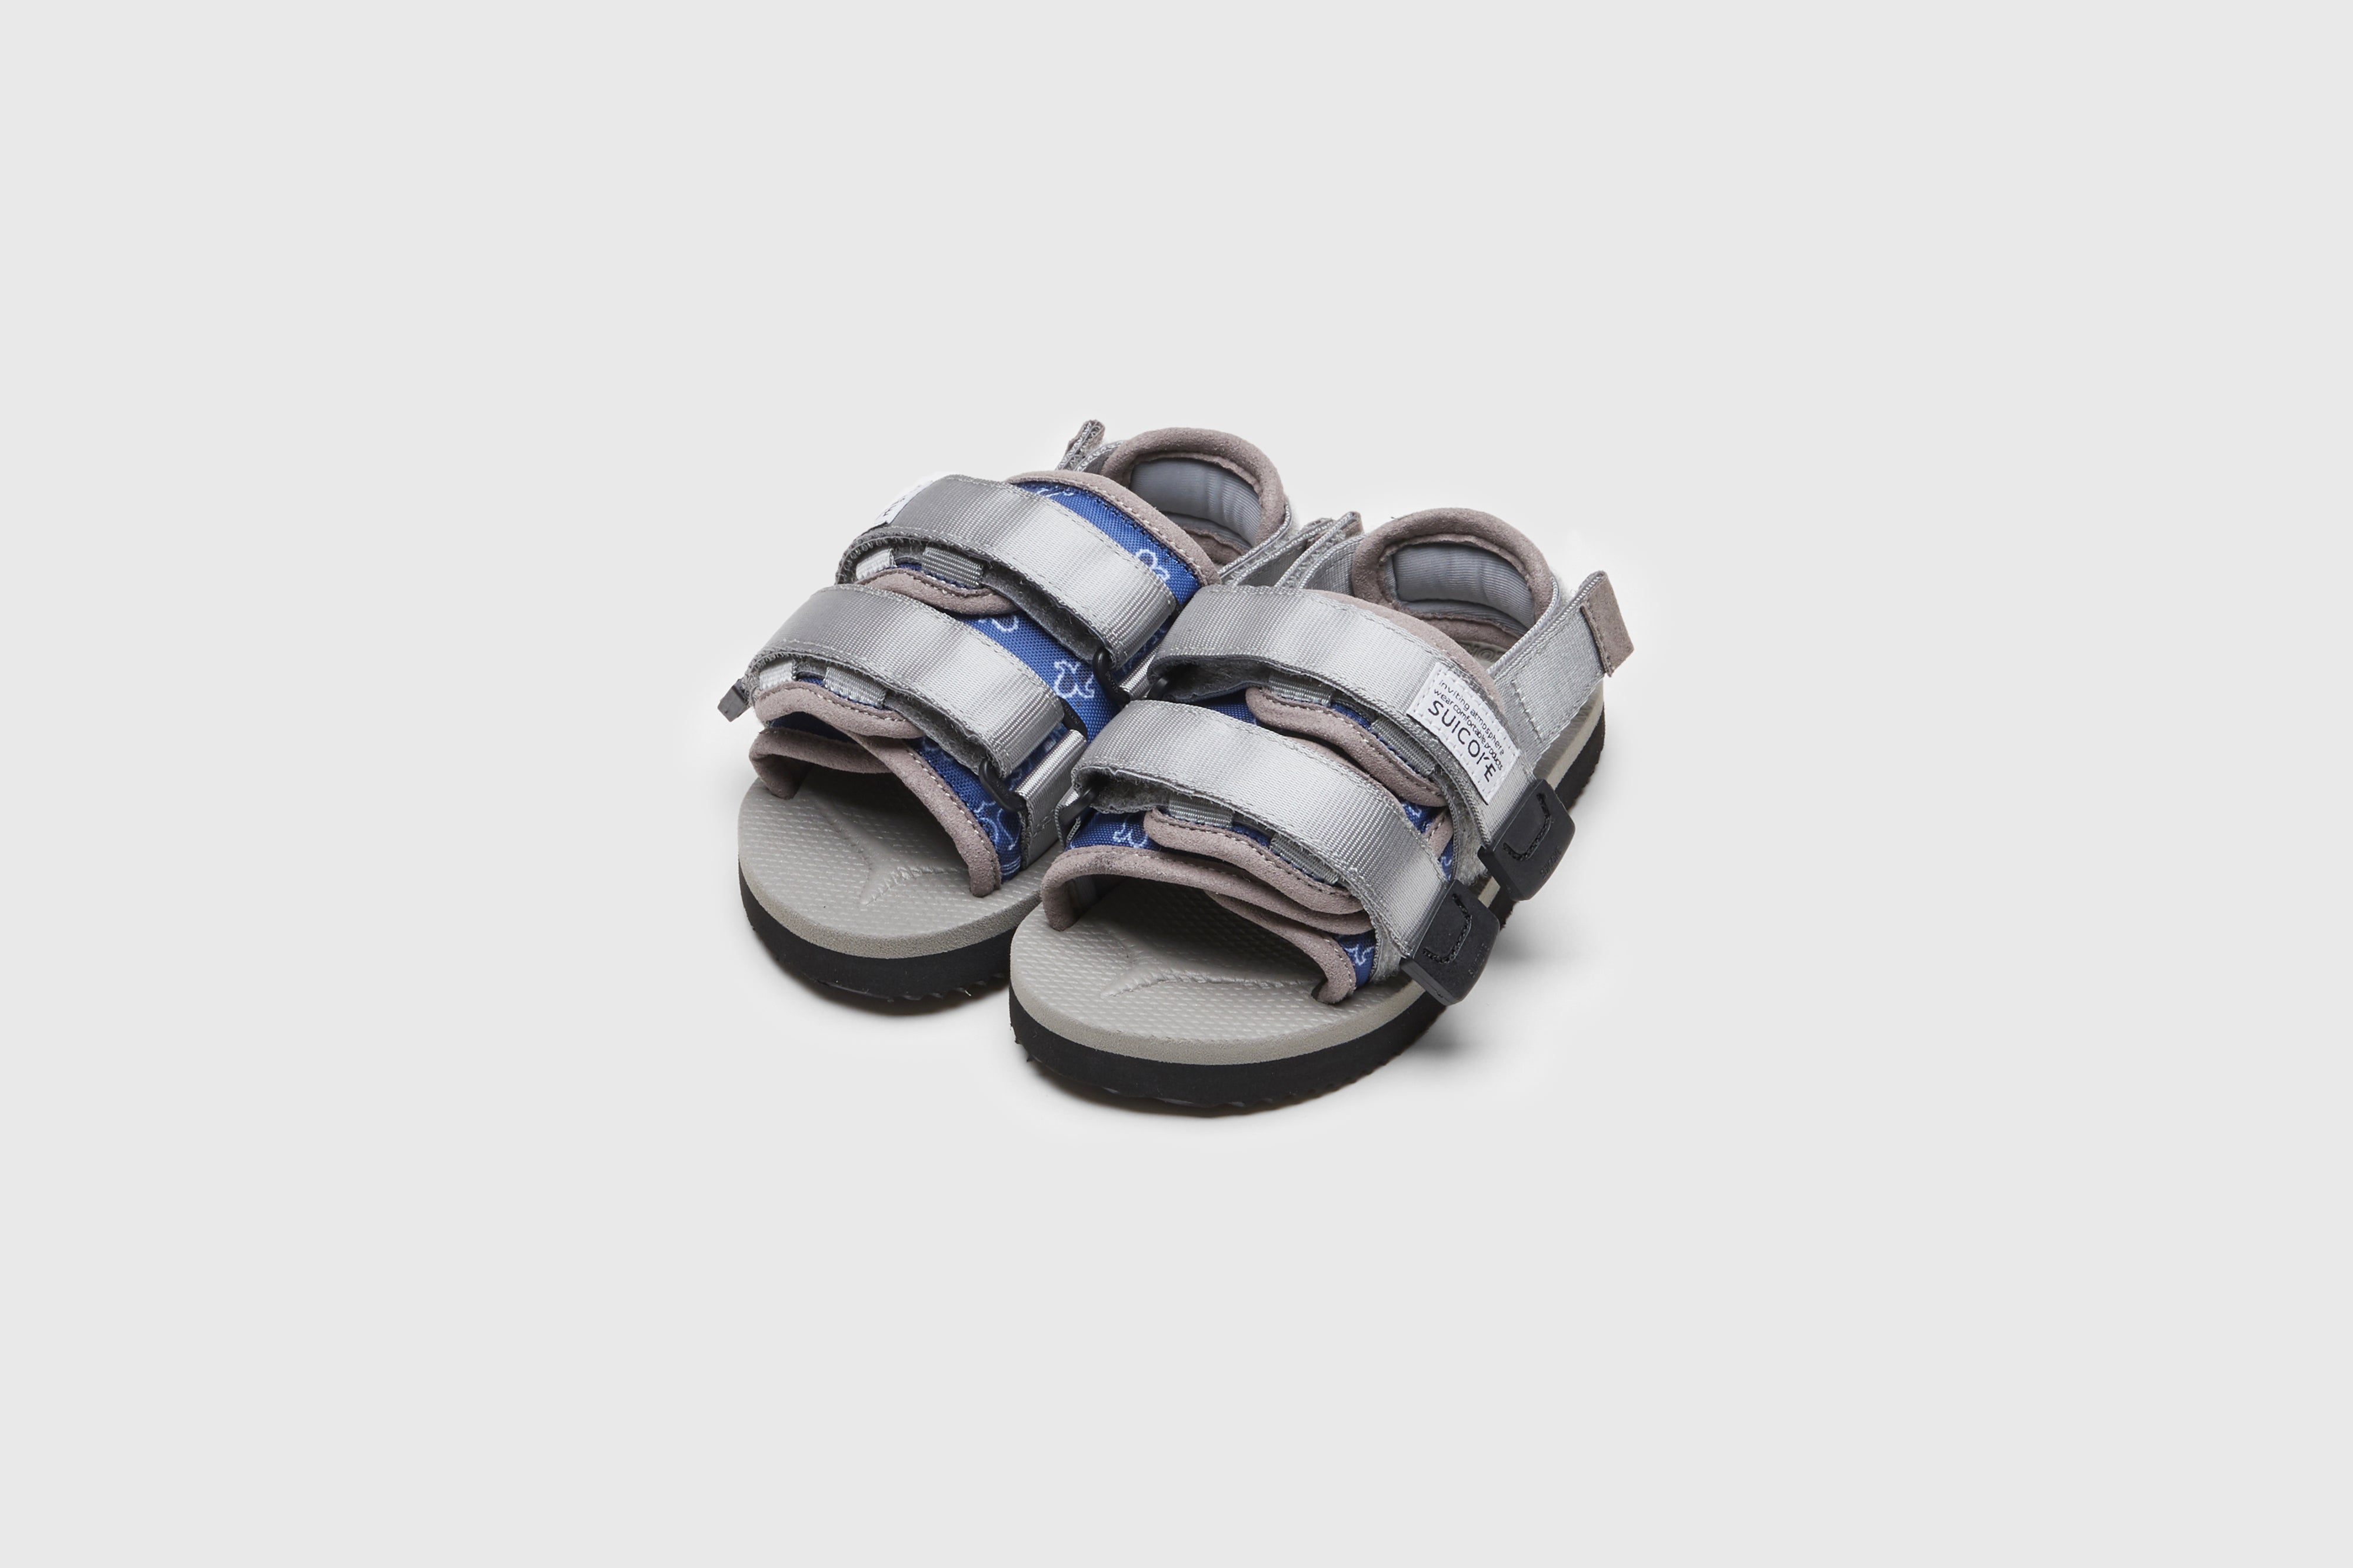 SUICOKE MOTO-2kids-PT05 slides with navy &amp; gray nylon upper, navy &amp; gray midsole and sole, strap and logo patch. From Spring/Summer 2023 collection on eightywingold Web Store, an official partner of SUICOKE. OG-056-2KIDS-PT05 NAVY X GRAY